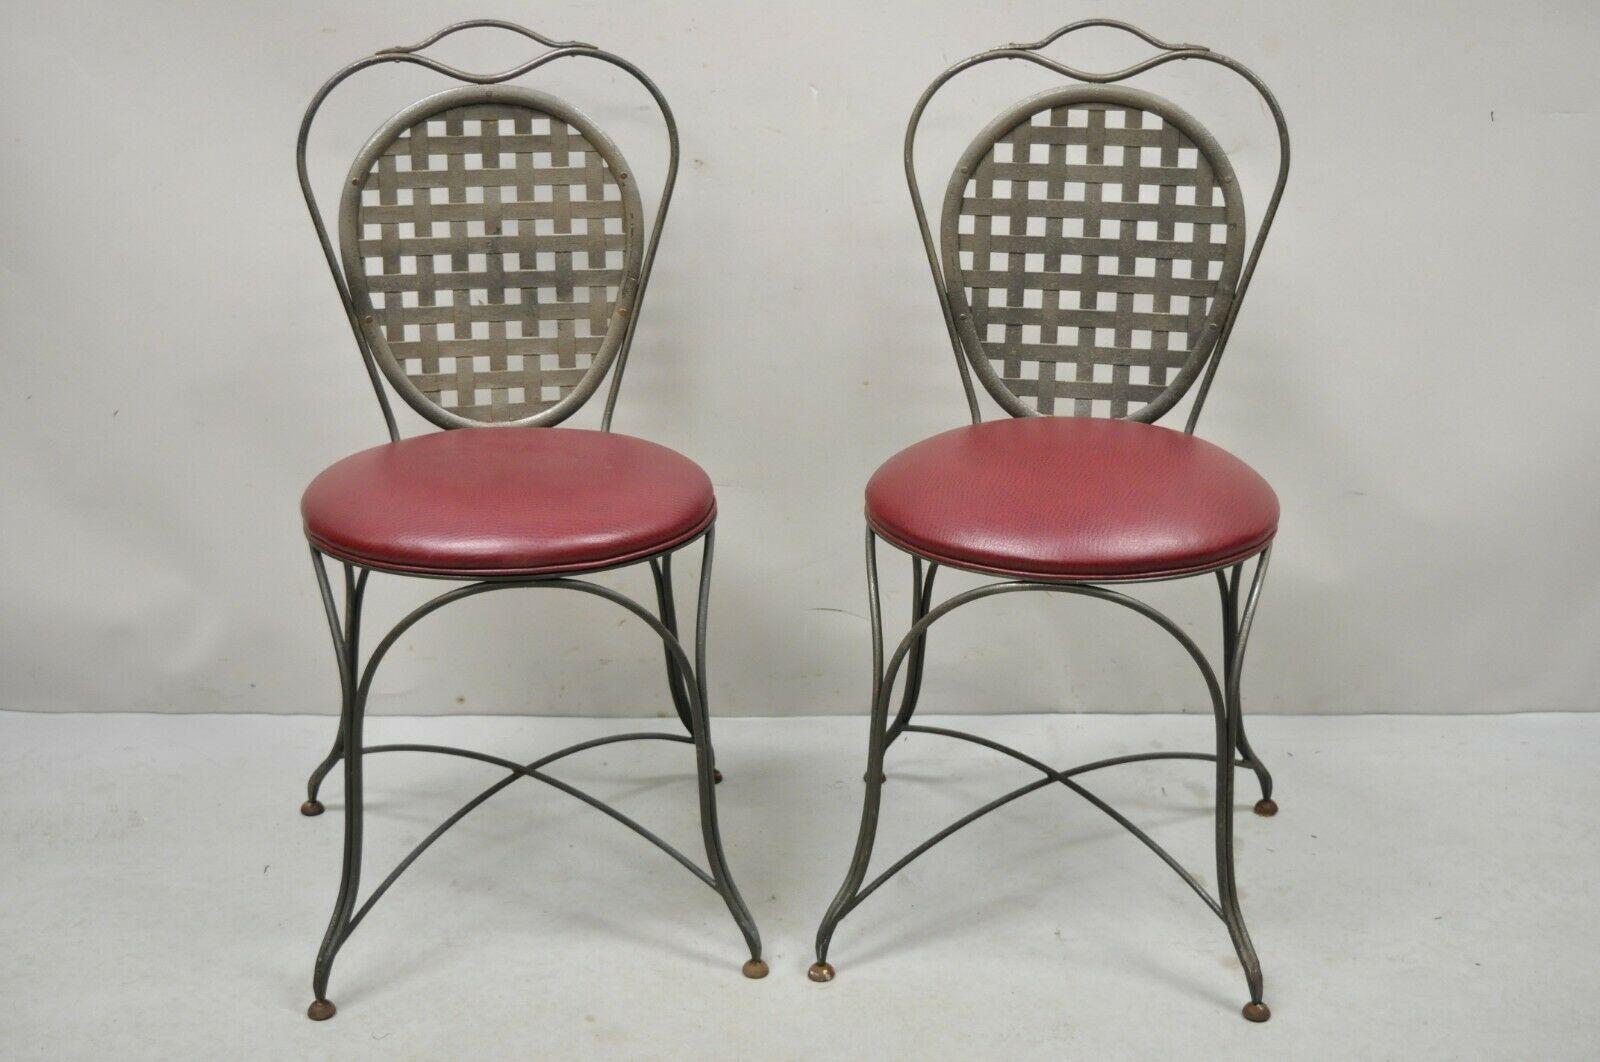 Italian Regency style wrought iron sunroom lattice round seat side chairs - a pair. Item features a pierced lattice back, stretcher base, red vinyl upholstered round seats, quality craftsmanship, great style and form. Circa Late 20th century.